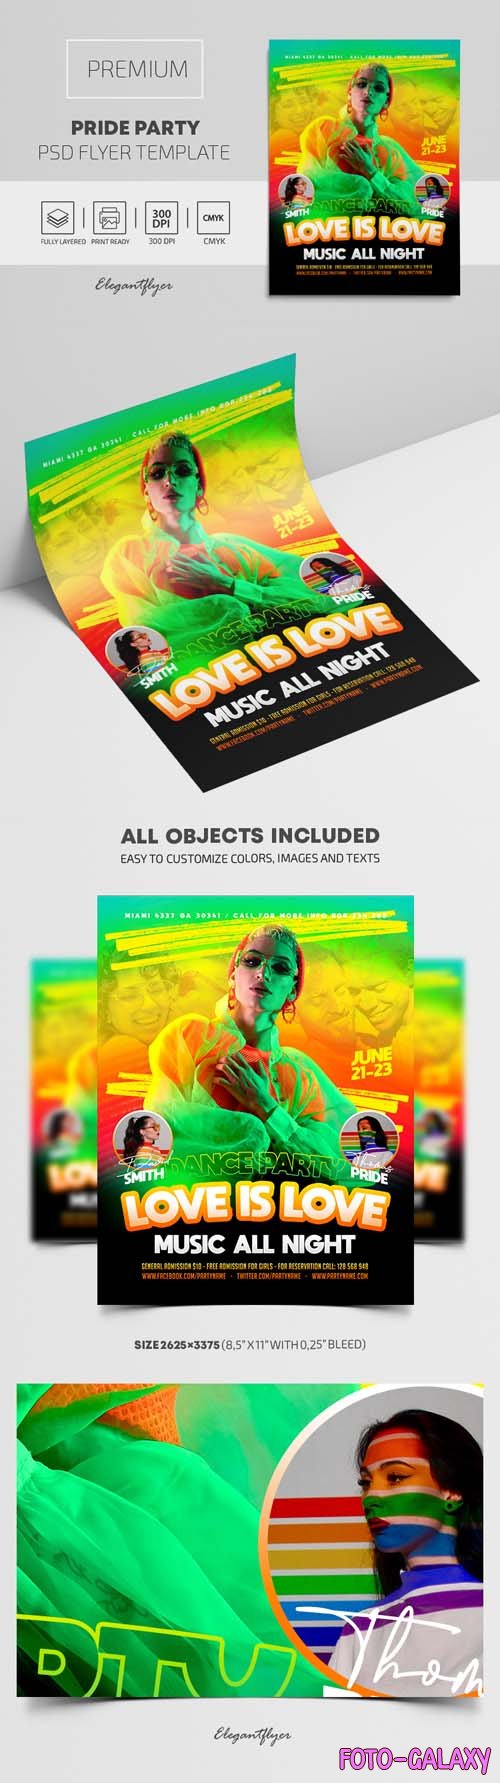 Pride Party PSD Flyer Template